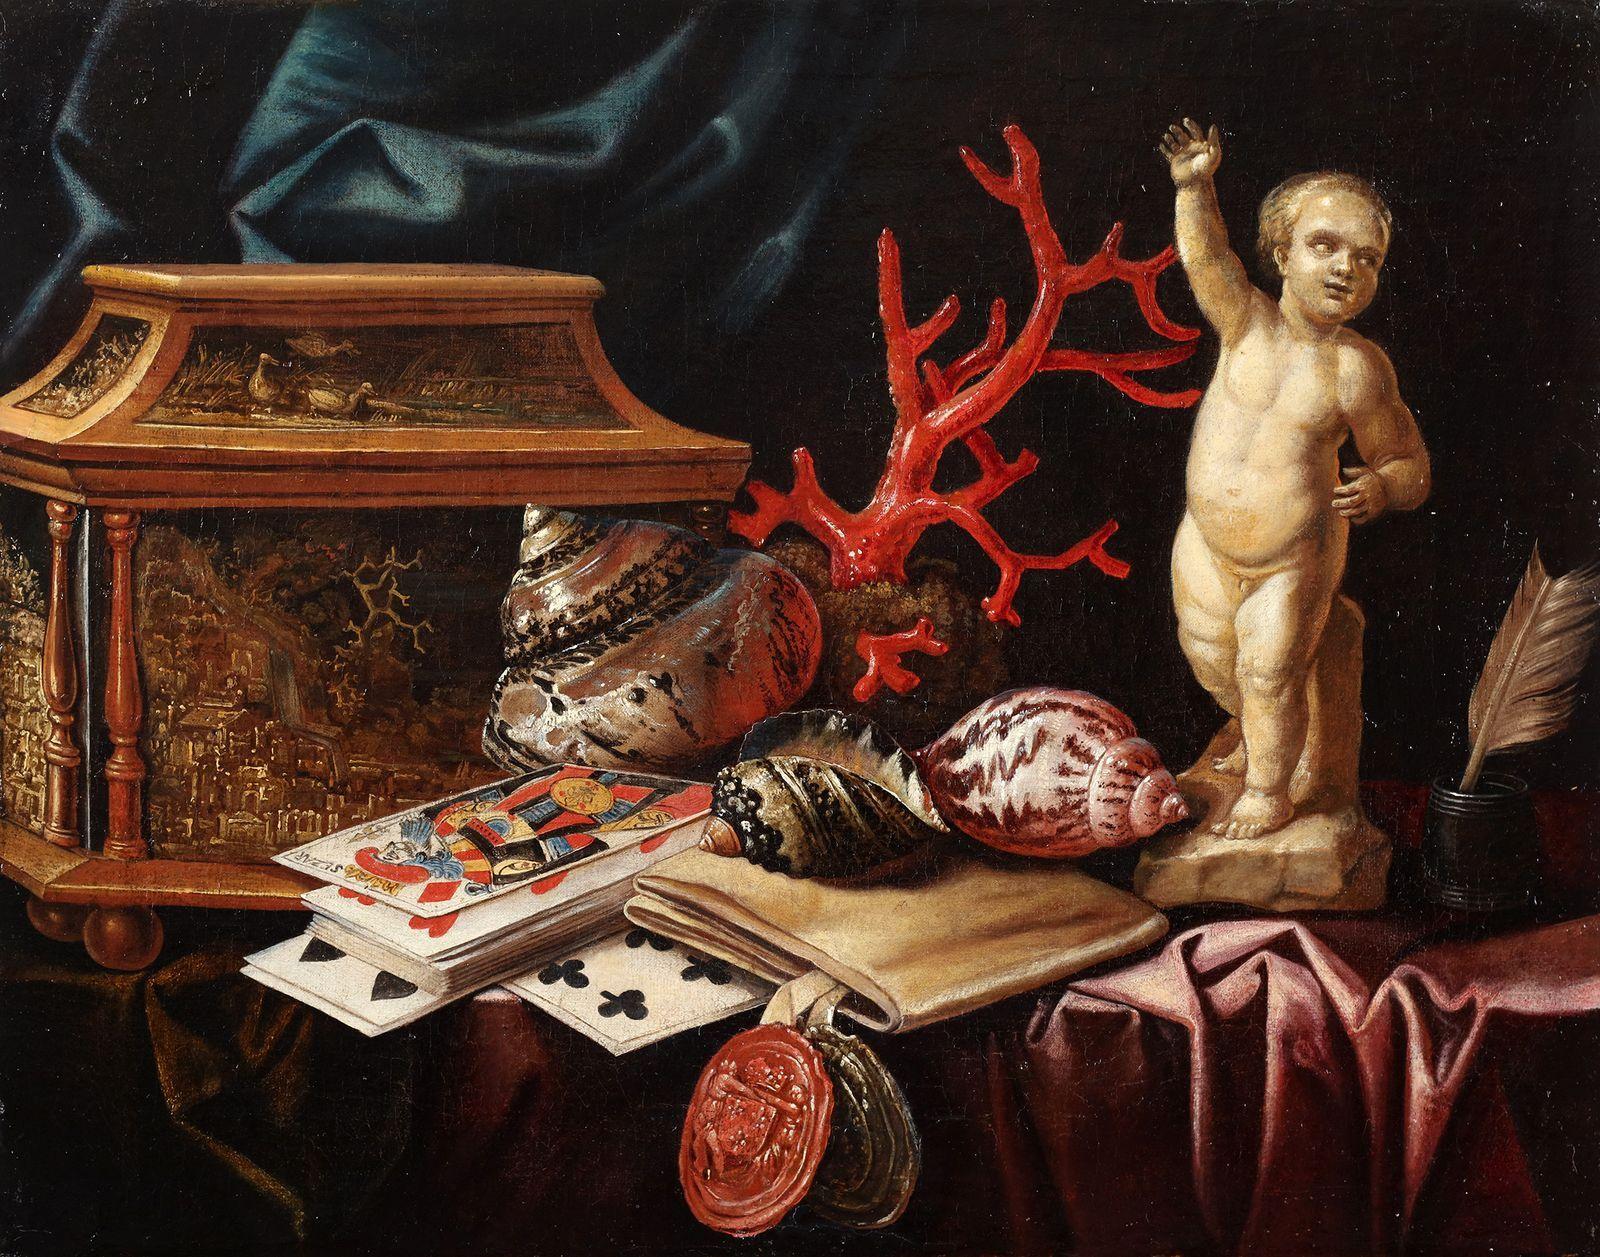 Still life with playing cards, coral, shells, a jewelry box and a stone sculpture

Oil on canvas

We'd like to thank dr. Fred Meijer for his attribution.

Carstian Luyckx was a 17th century Flemish artist. In this painting, Luyckx carefully arranges